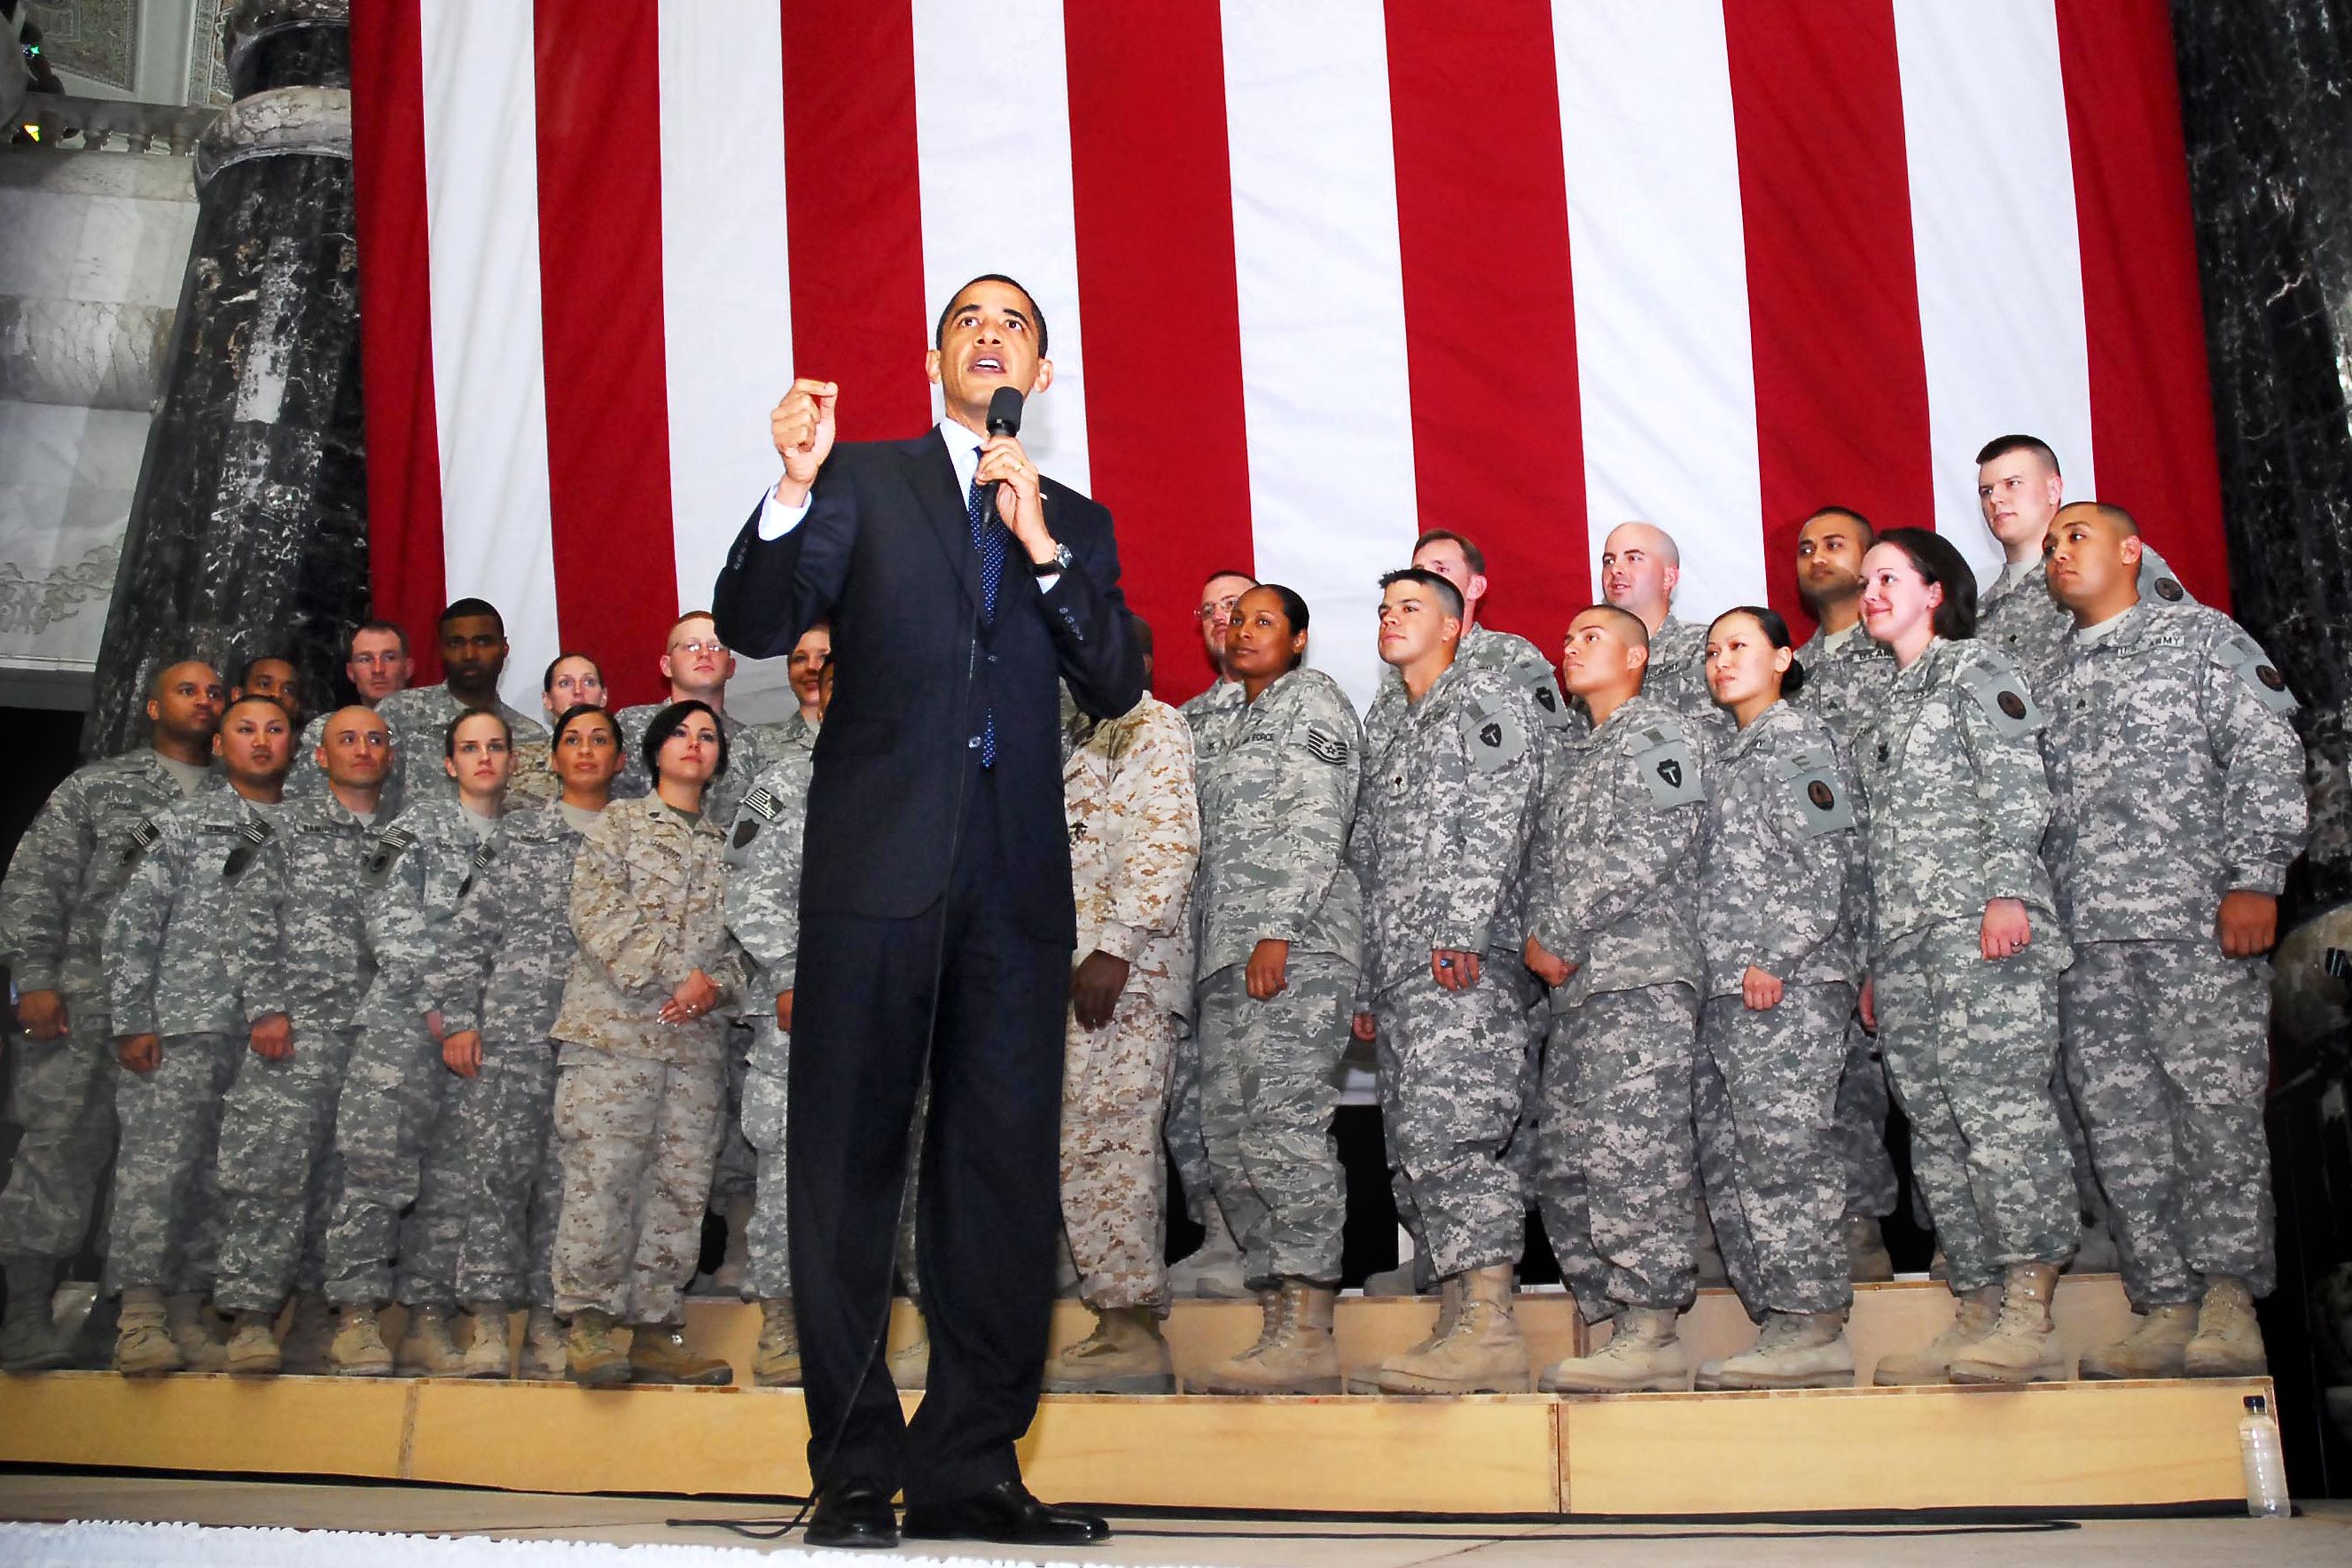 President of the United States Barak Obama visited Al Faw Palace on Camp Victory, Iraq April 7.  This was Obama's first visit to Iraq as commander in chief and made time to talk to service members and civilians serving here.